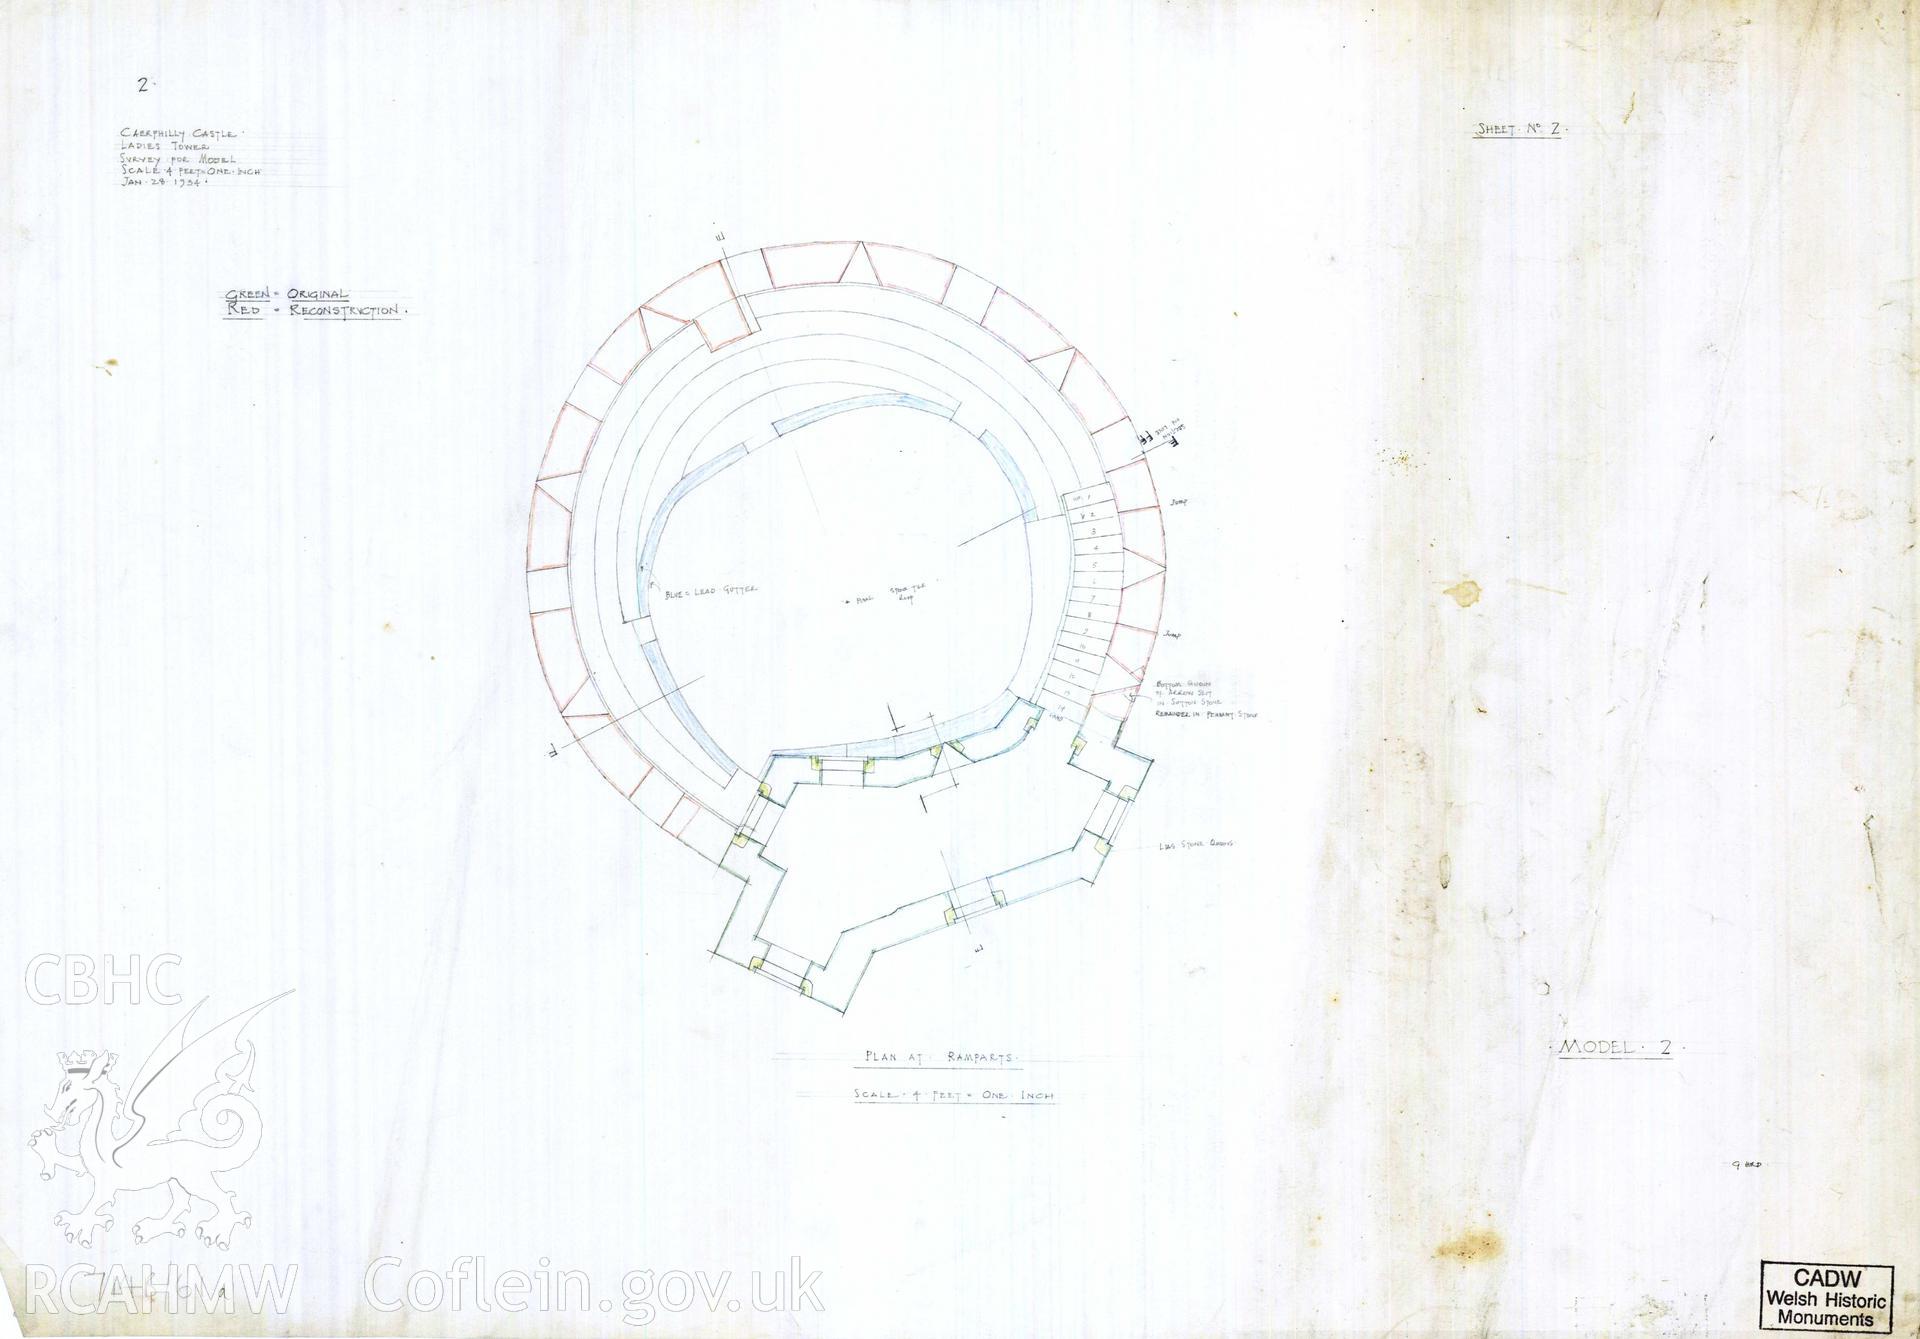 Digital copy of Cadw guardianship monument drawing of Caerphilly Castle. NW tower, 2, roof-level plan. Cadw ref. no: 714B/61a. Scale 1:48.  Original drawing withdrawn and returned to Cadw at their request.